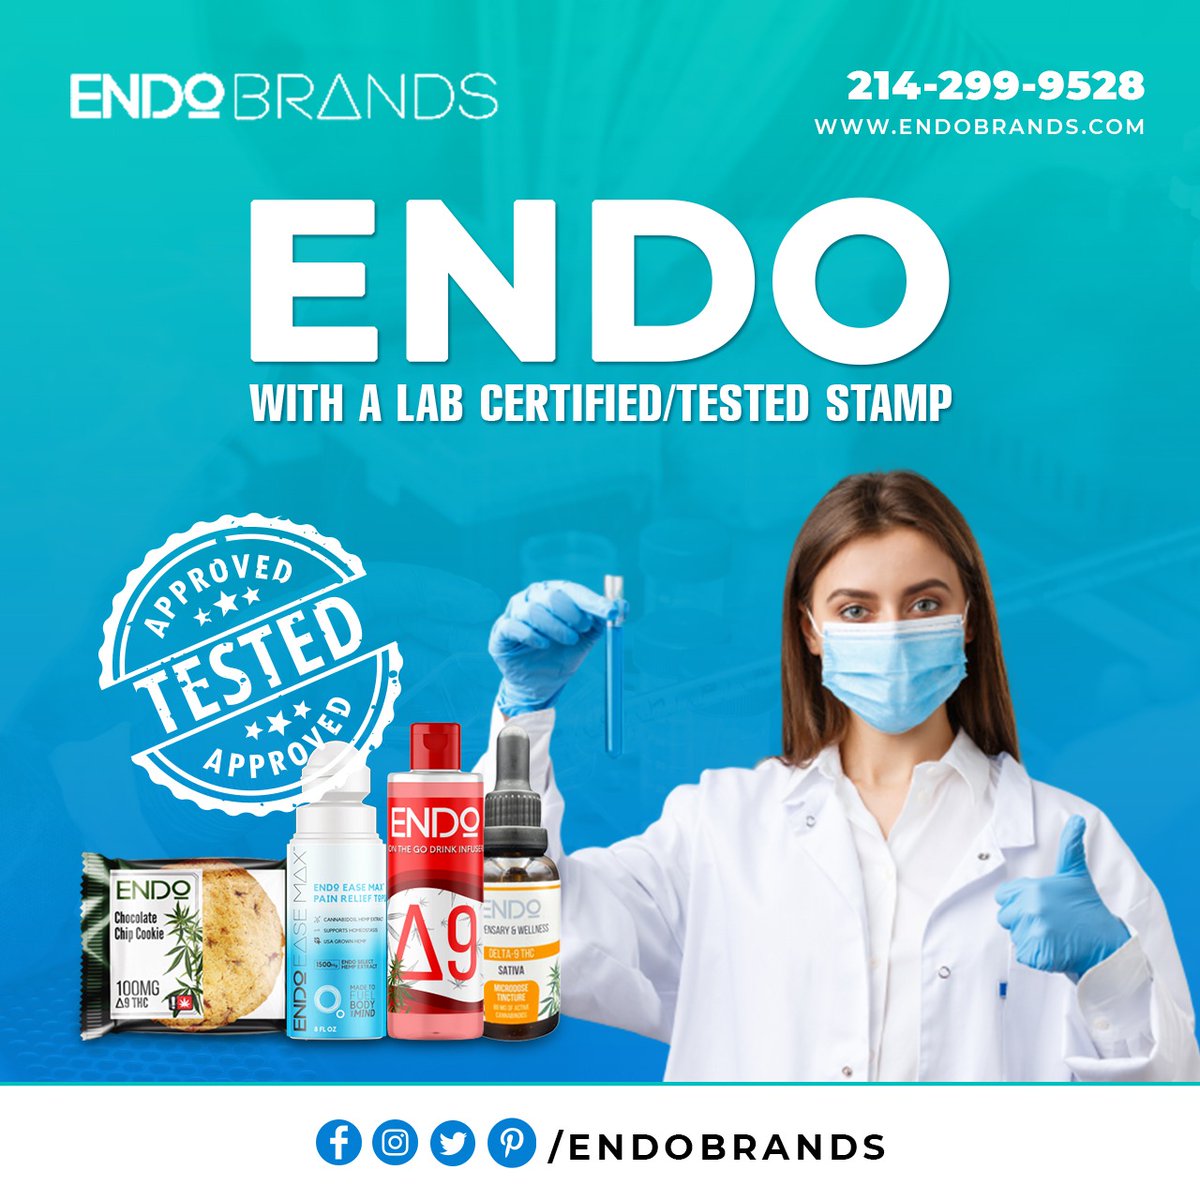 Lab Certified cannabinoid products available at ENDO. 😊 endobrands.com

#labtest #labcertified #certifiedcannabinoid #healthbenefits #medicinalherbs #cbdproduct #thc #ENDO